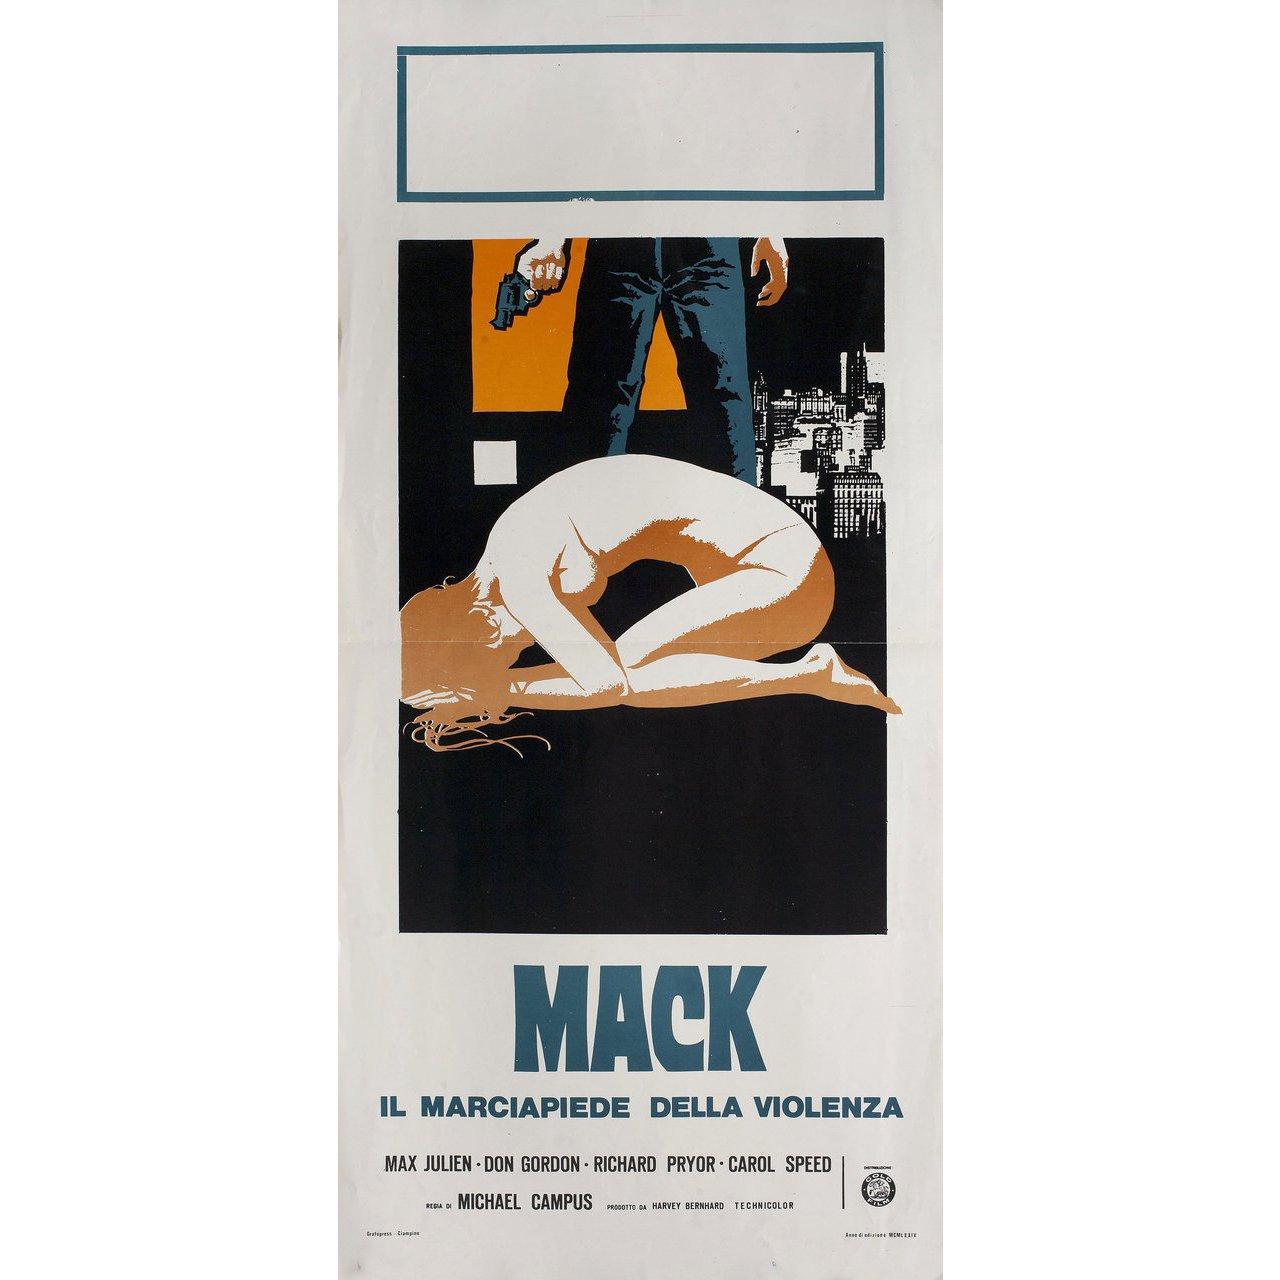 Original 1974 Italian locandina poster for the film The Mack directed by Michael Campus with Max Julien / Don Gordon / Richard Pryor / Carol Speed. Very Good-Fine condition, folded. Many original posters were issued folded or were subsequently